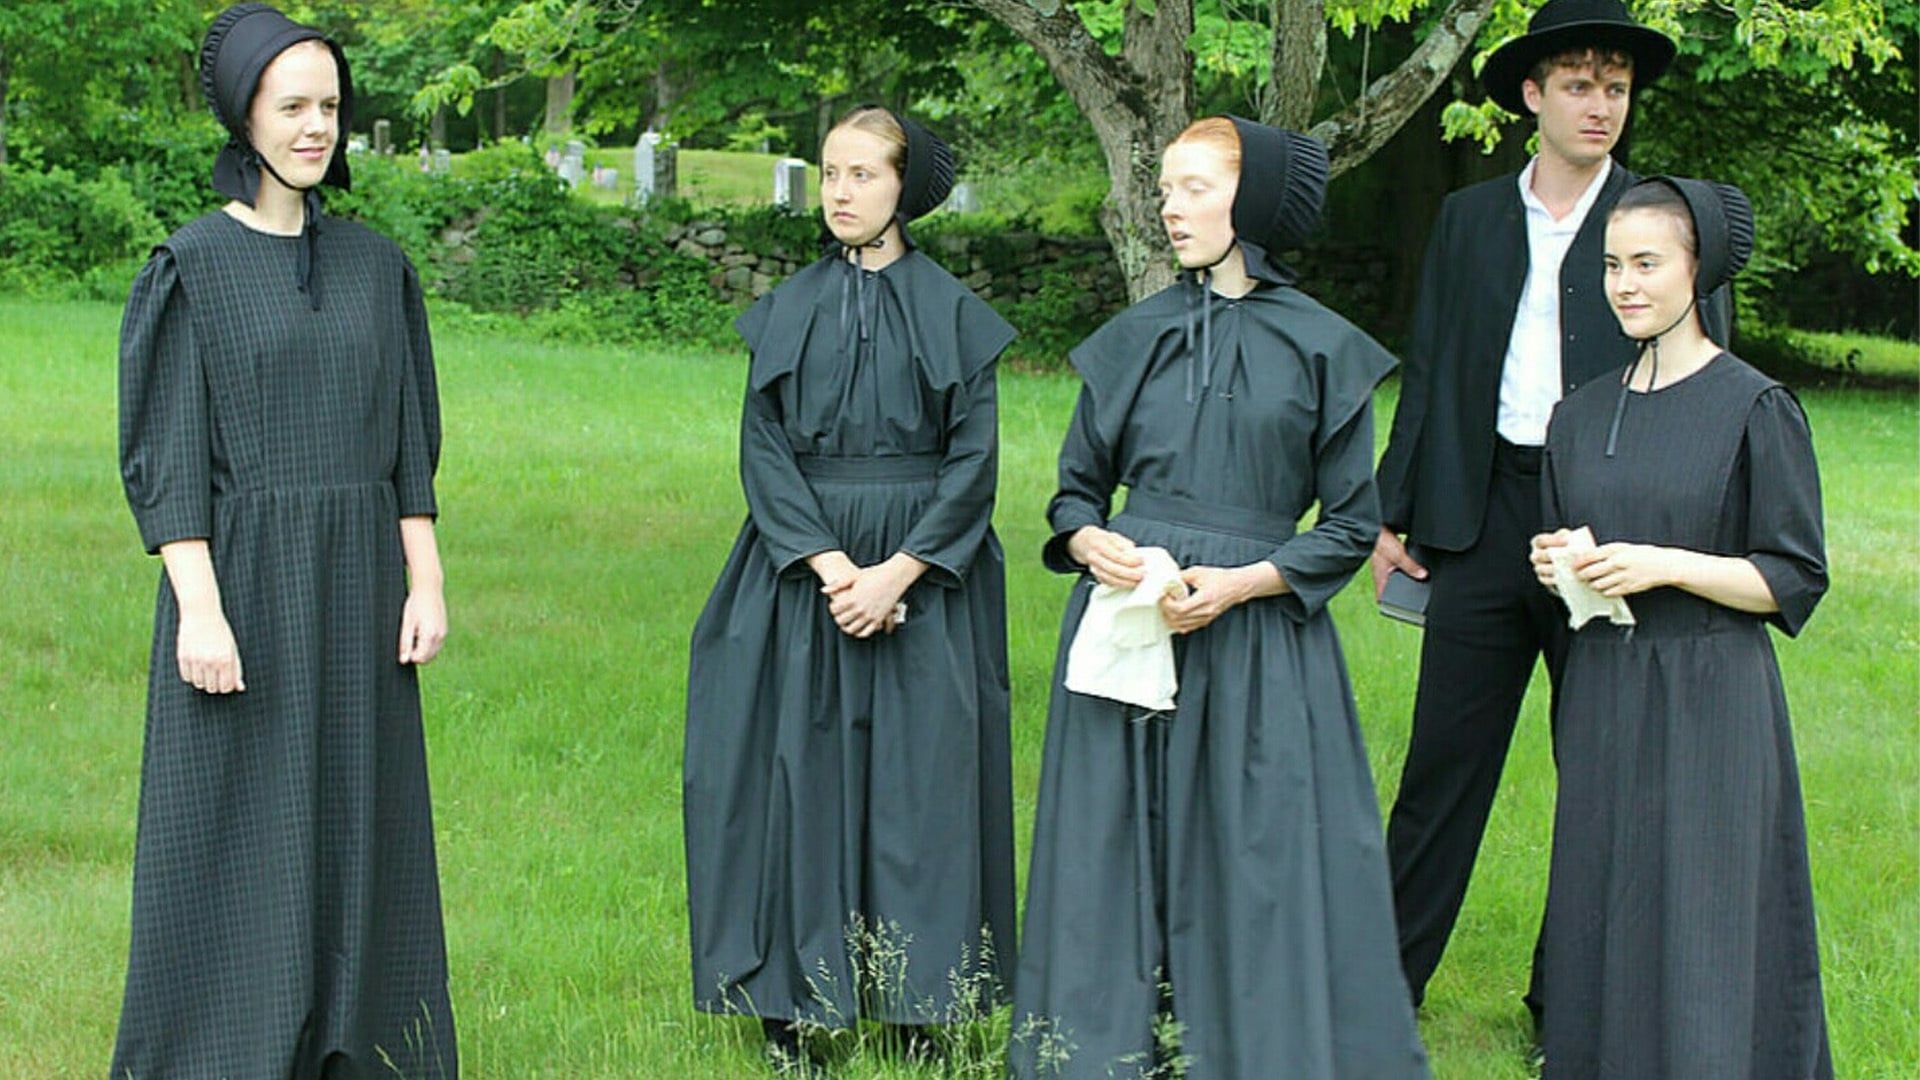 Amish Witches: The True Story of Holmes County background